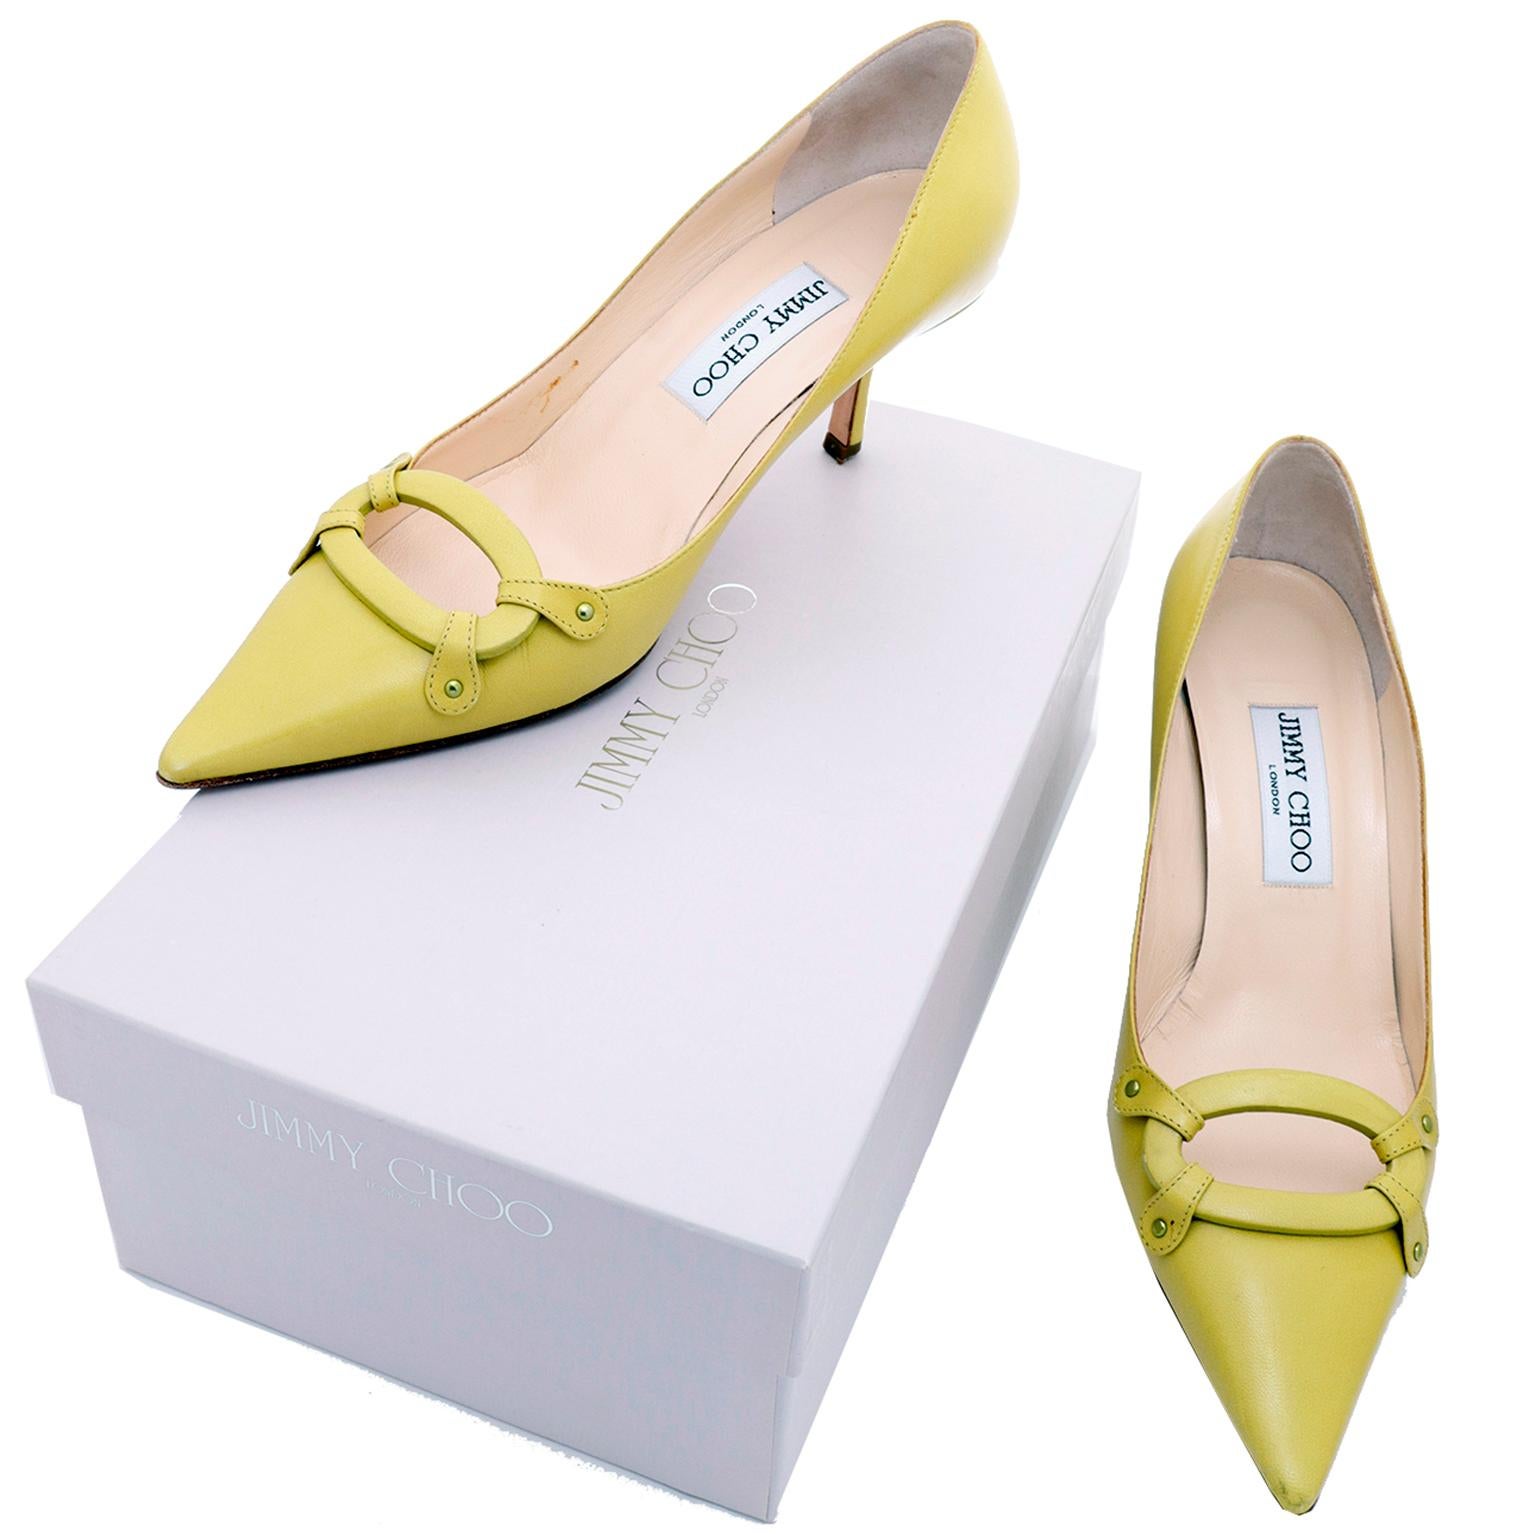 These vintage Jimmy Choo shoes are in a bright chartreuse green leather and have open leather buckles attached with 4 leather riveted straps on the toe box. The shoes come with their original box and dust bag and are labeled Lime 1727 Kid size 37.